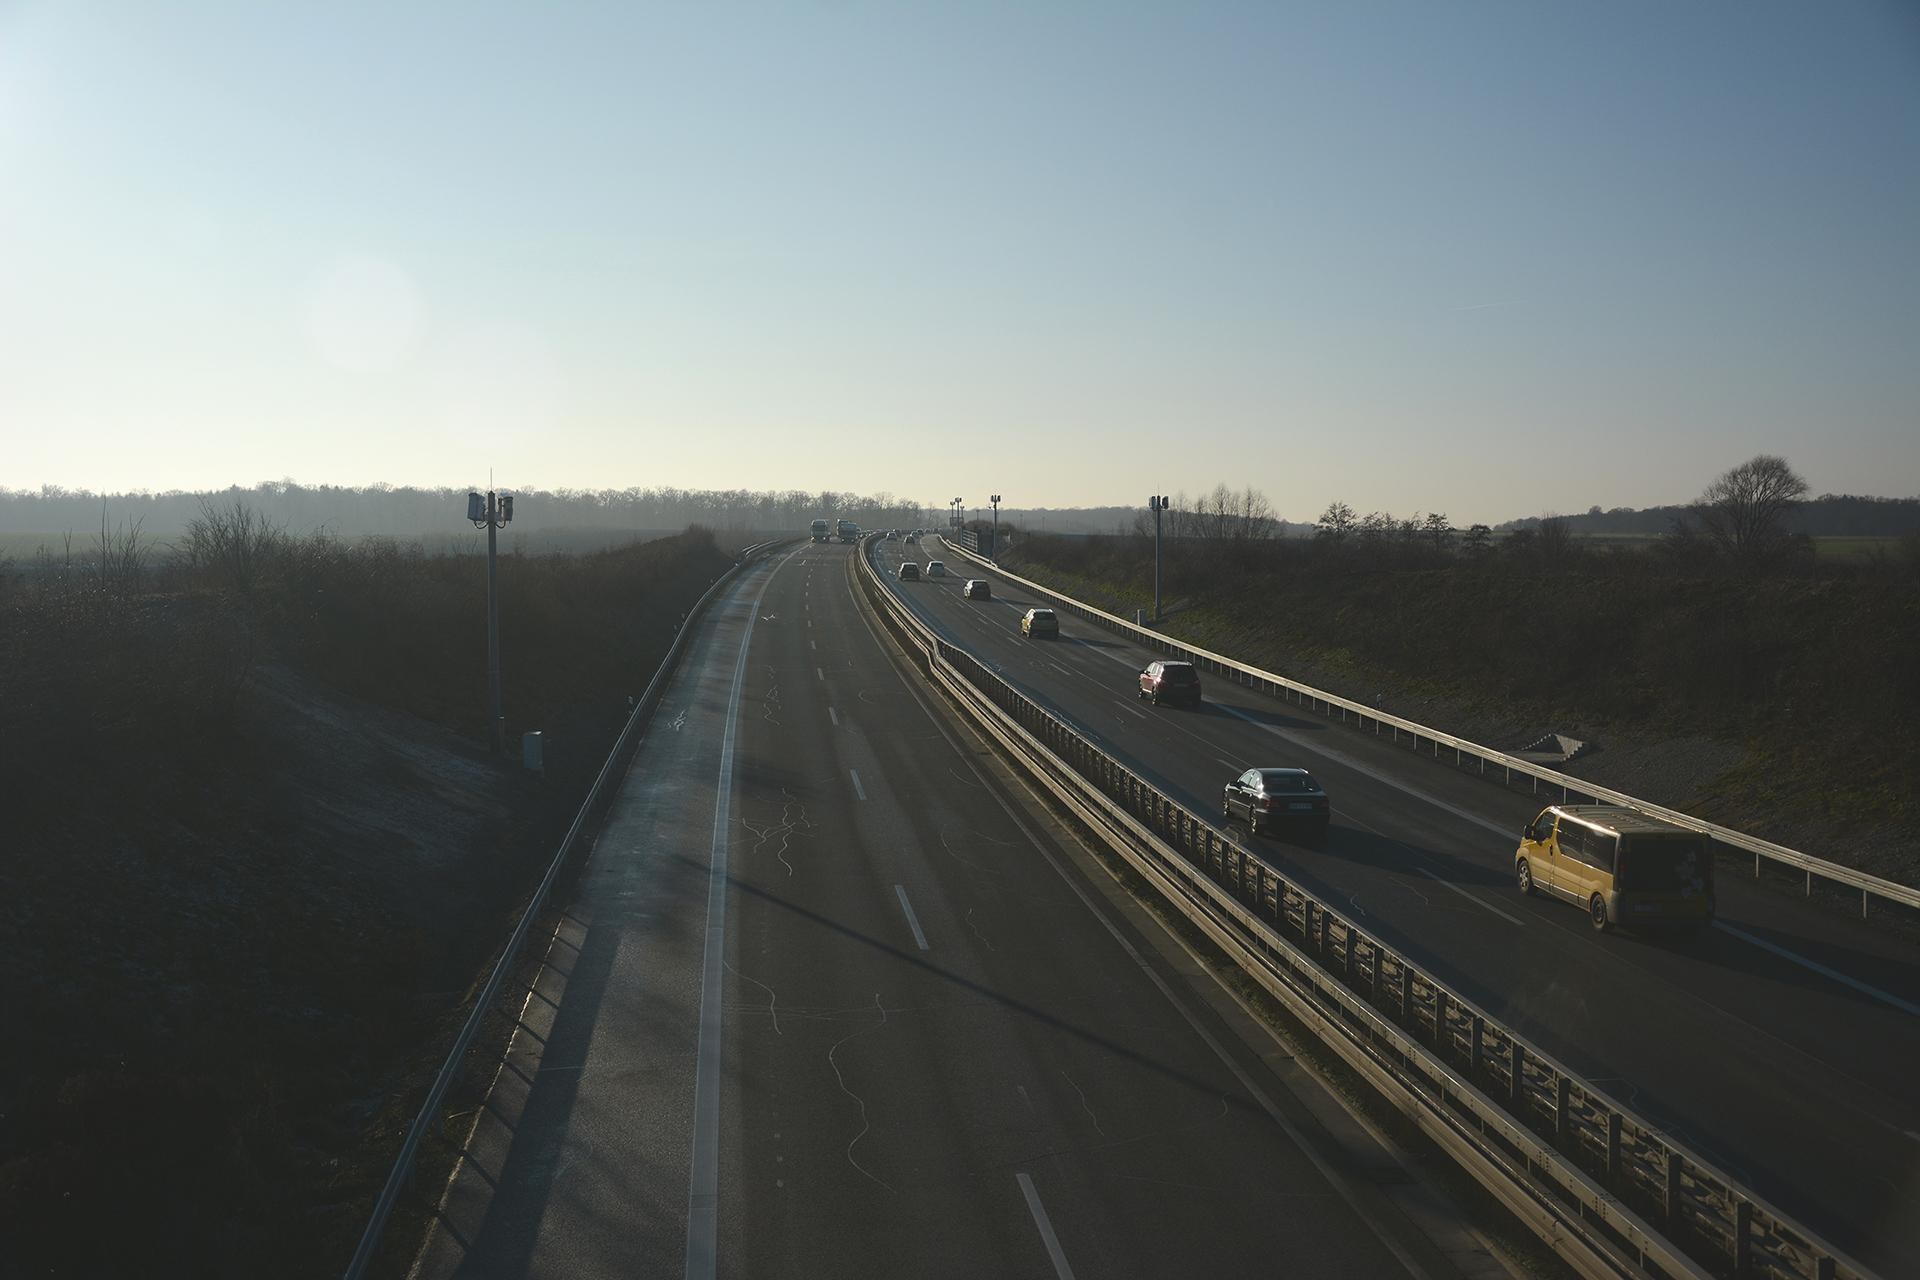 Recording objects anonymously within the A39 traffic area